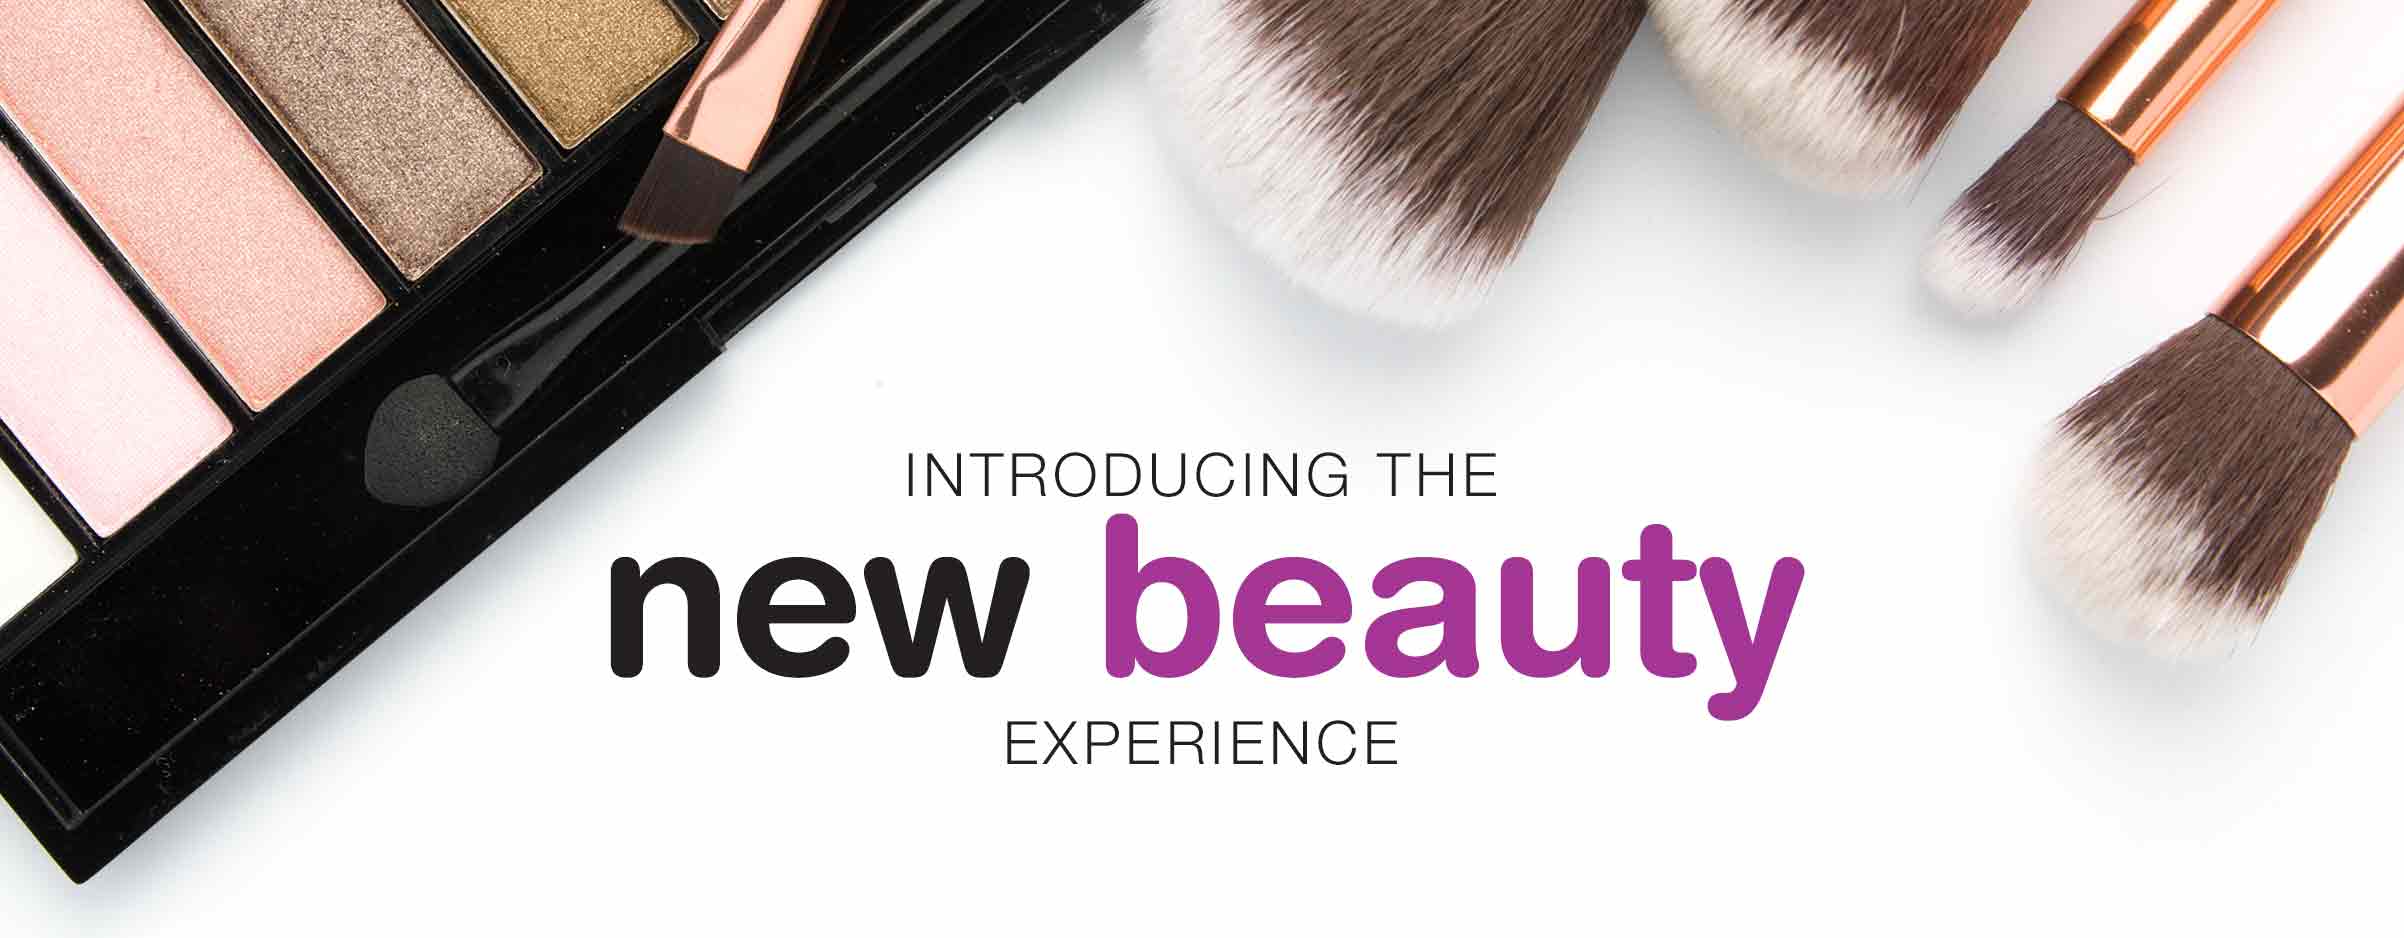 New Beauty Experience - Expert Consultants & Exclusive Brands | Walgreens